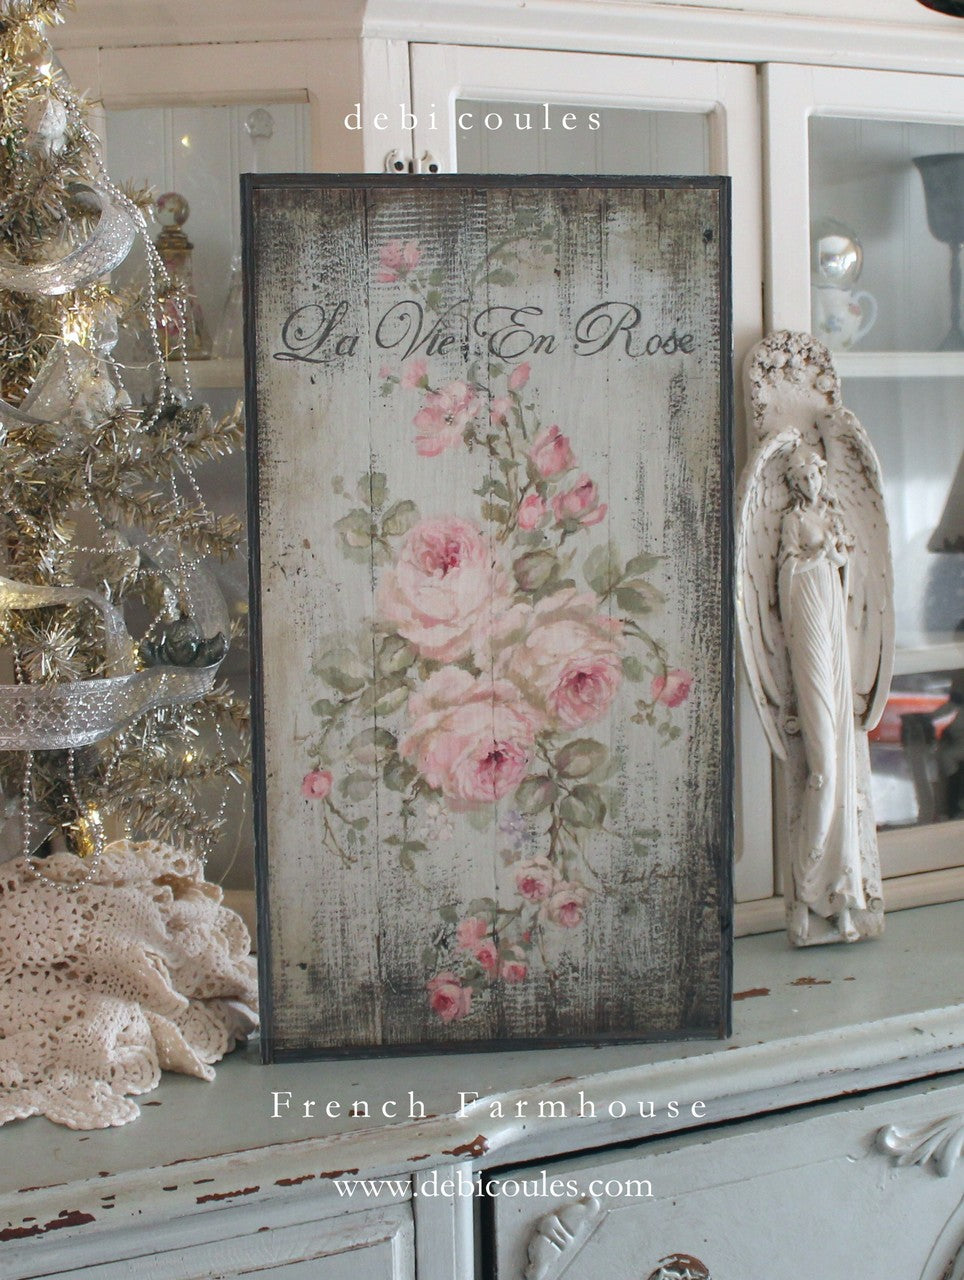 Shabby Chic French Saying Pink Roses La Vie En Rose, Life in pink, Rustic Wood Wall Decor, Debi Coules, Framed in rustic style grey barnwood. Stunning roses by Debi Coules will add to your modern farmhouse decor, English Roses in full bloom, trailing